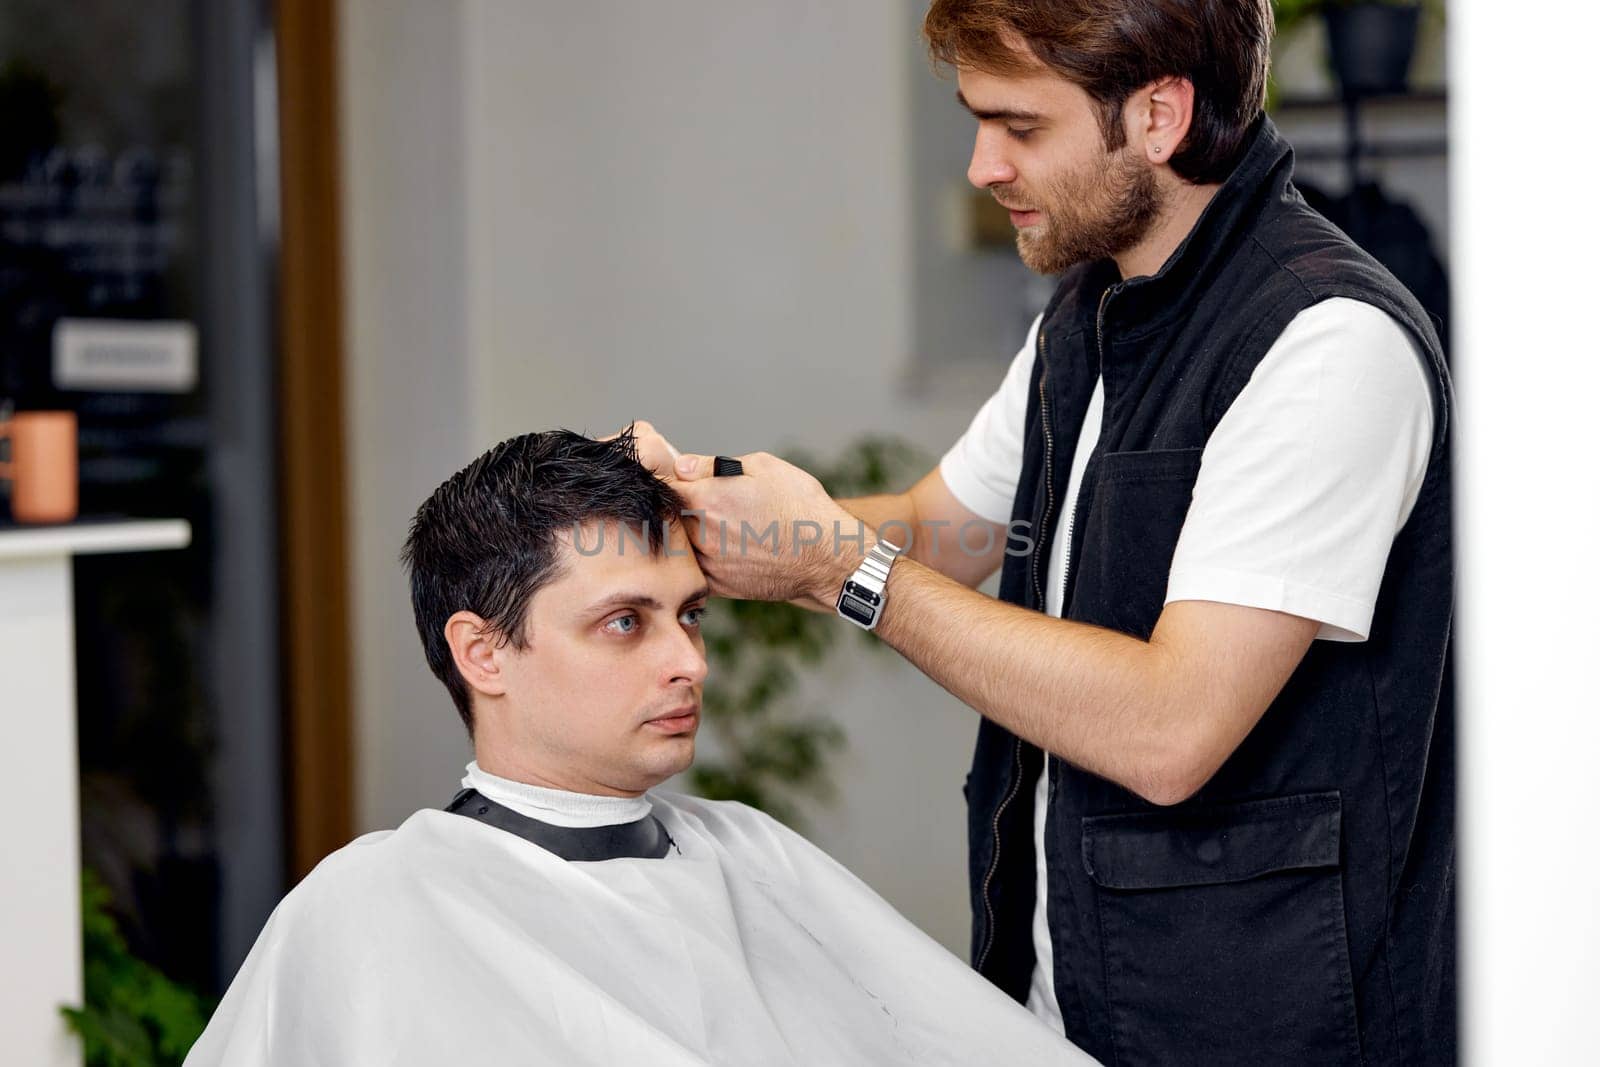 professional male hairstylist combing young customer's hair in barbershop